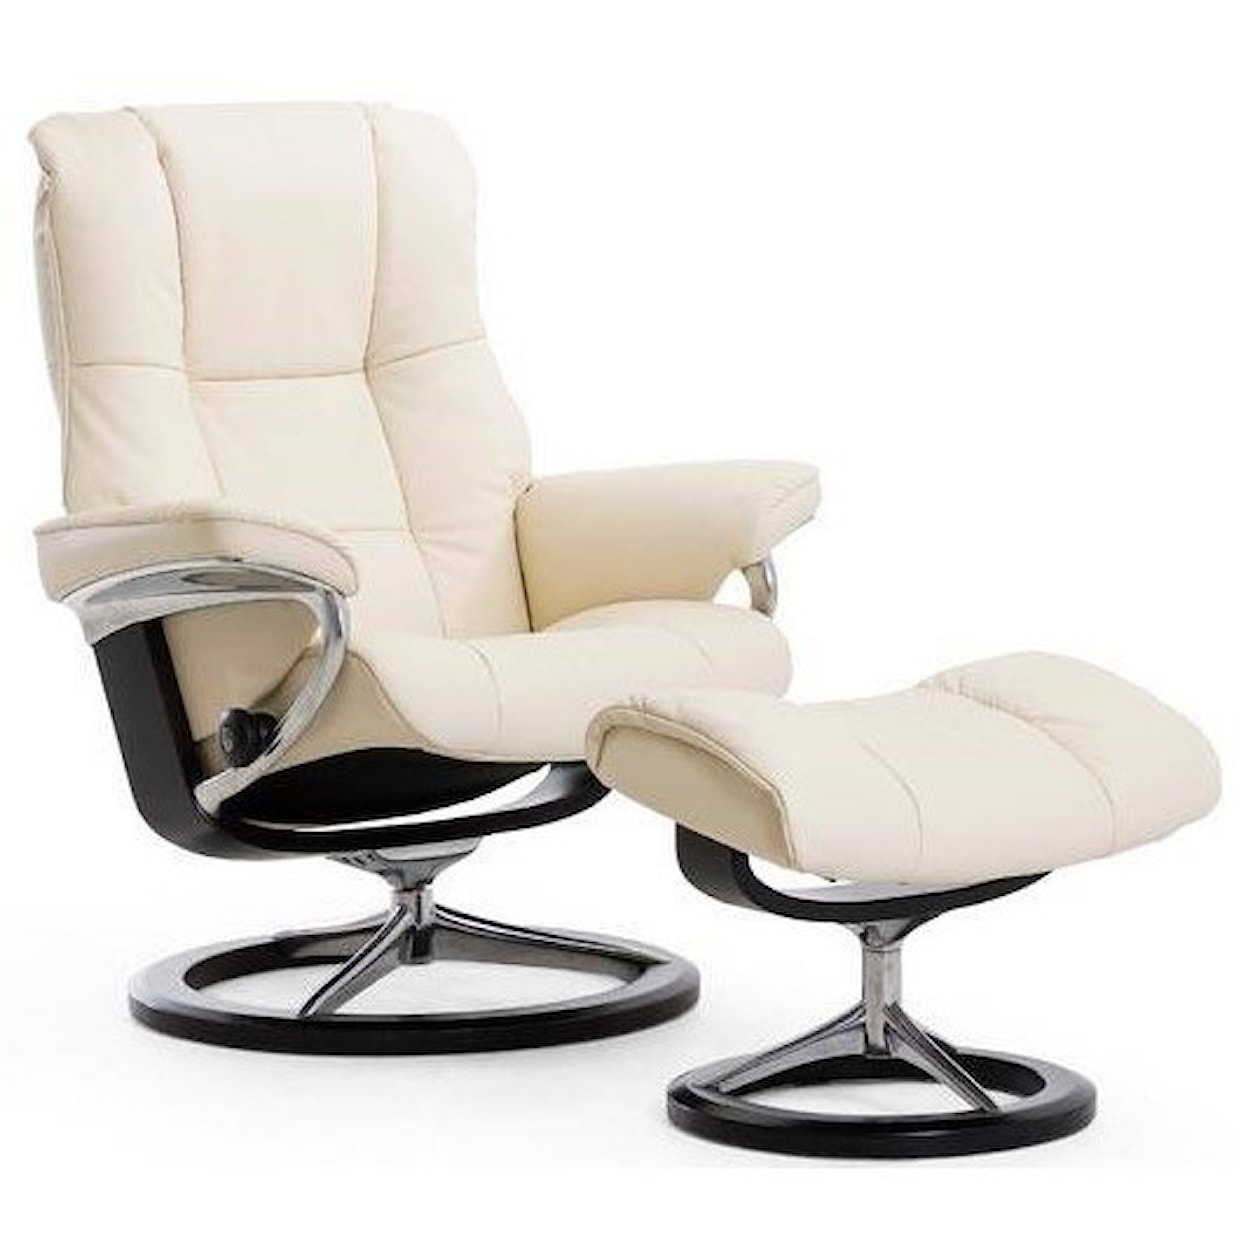 Stressless by Ekornes Mayfair Small Reclining Chair and Ottoman